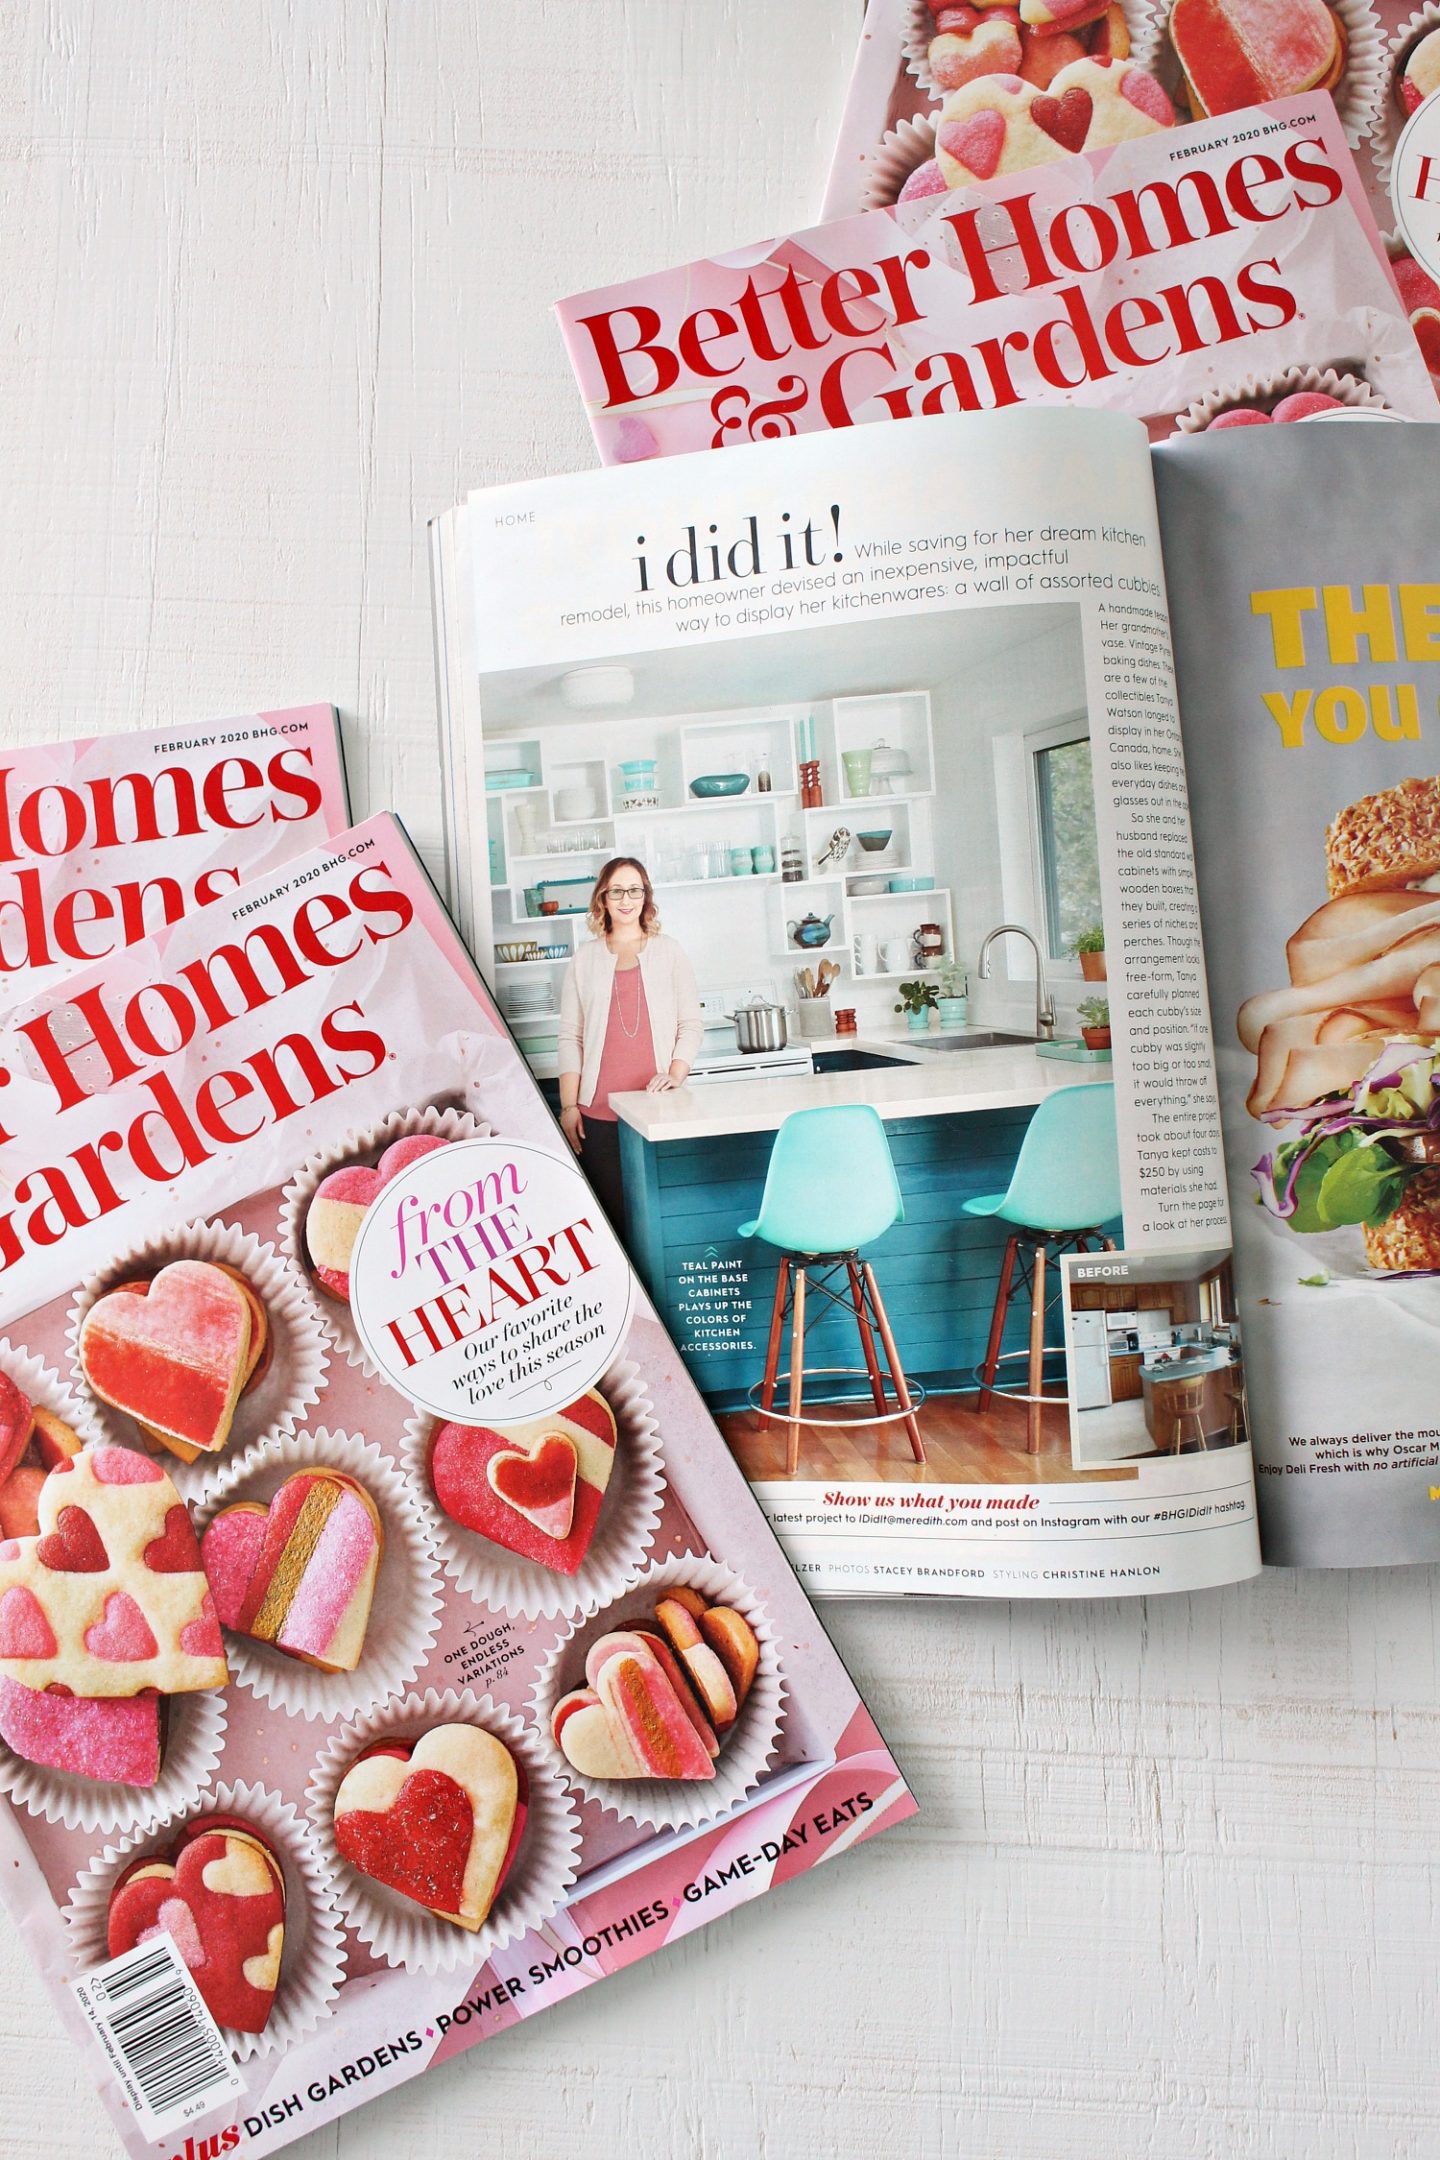 See My Kitchen In Better Homes Gardens Magazine Dans Le Lakehouse